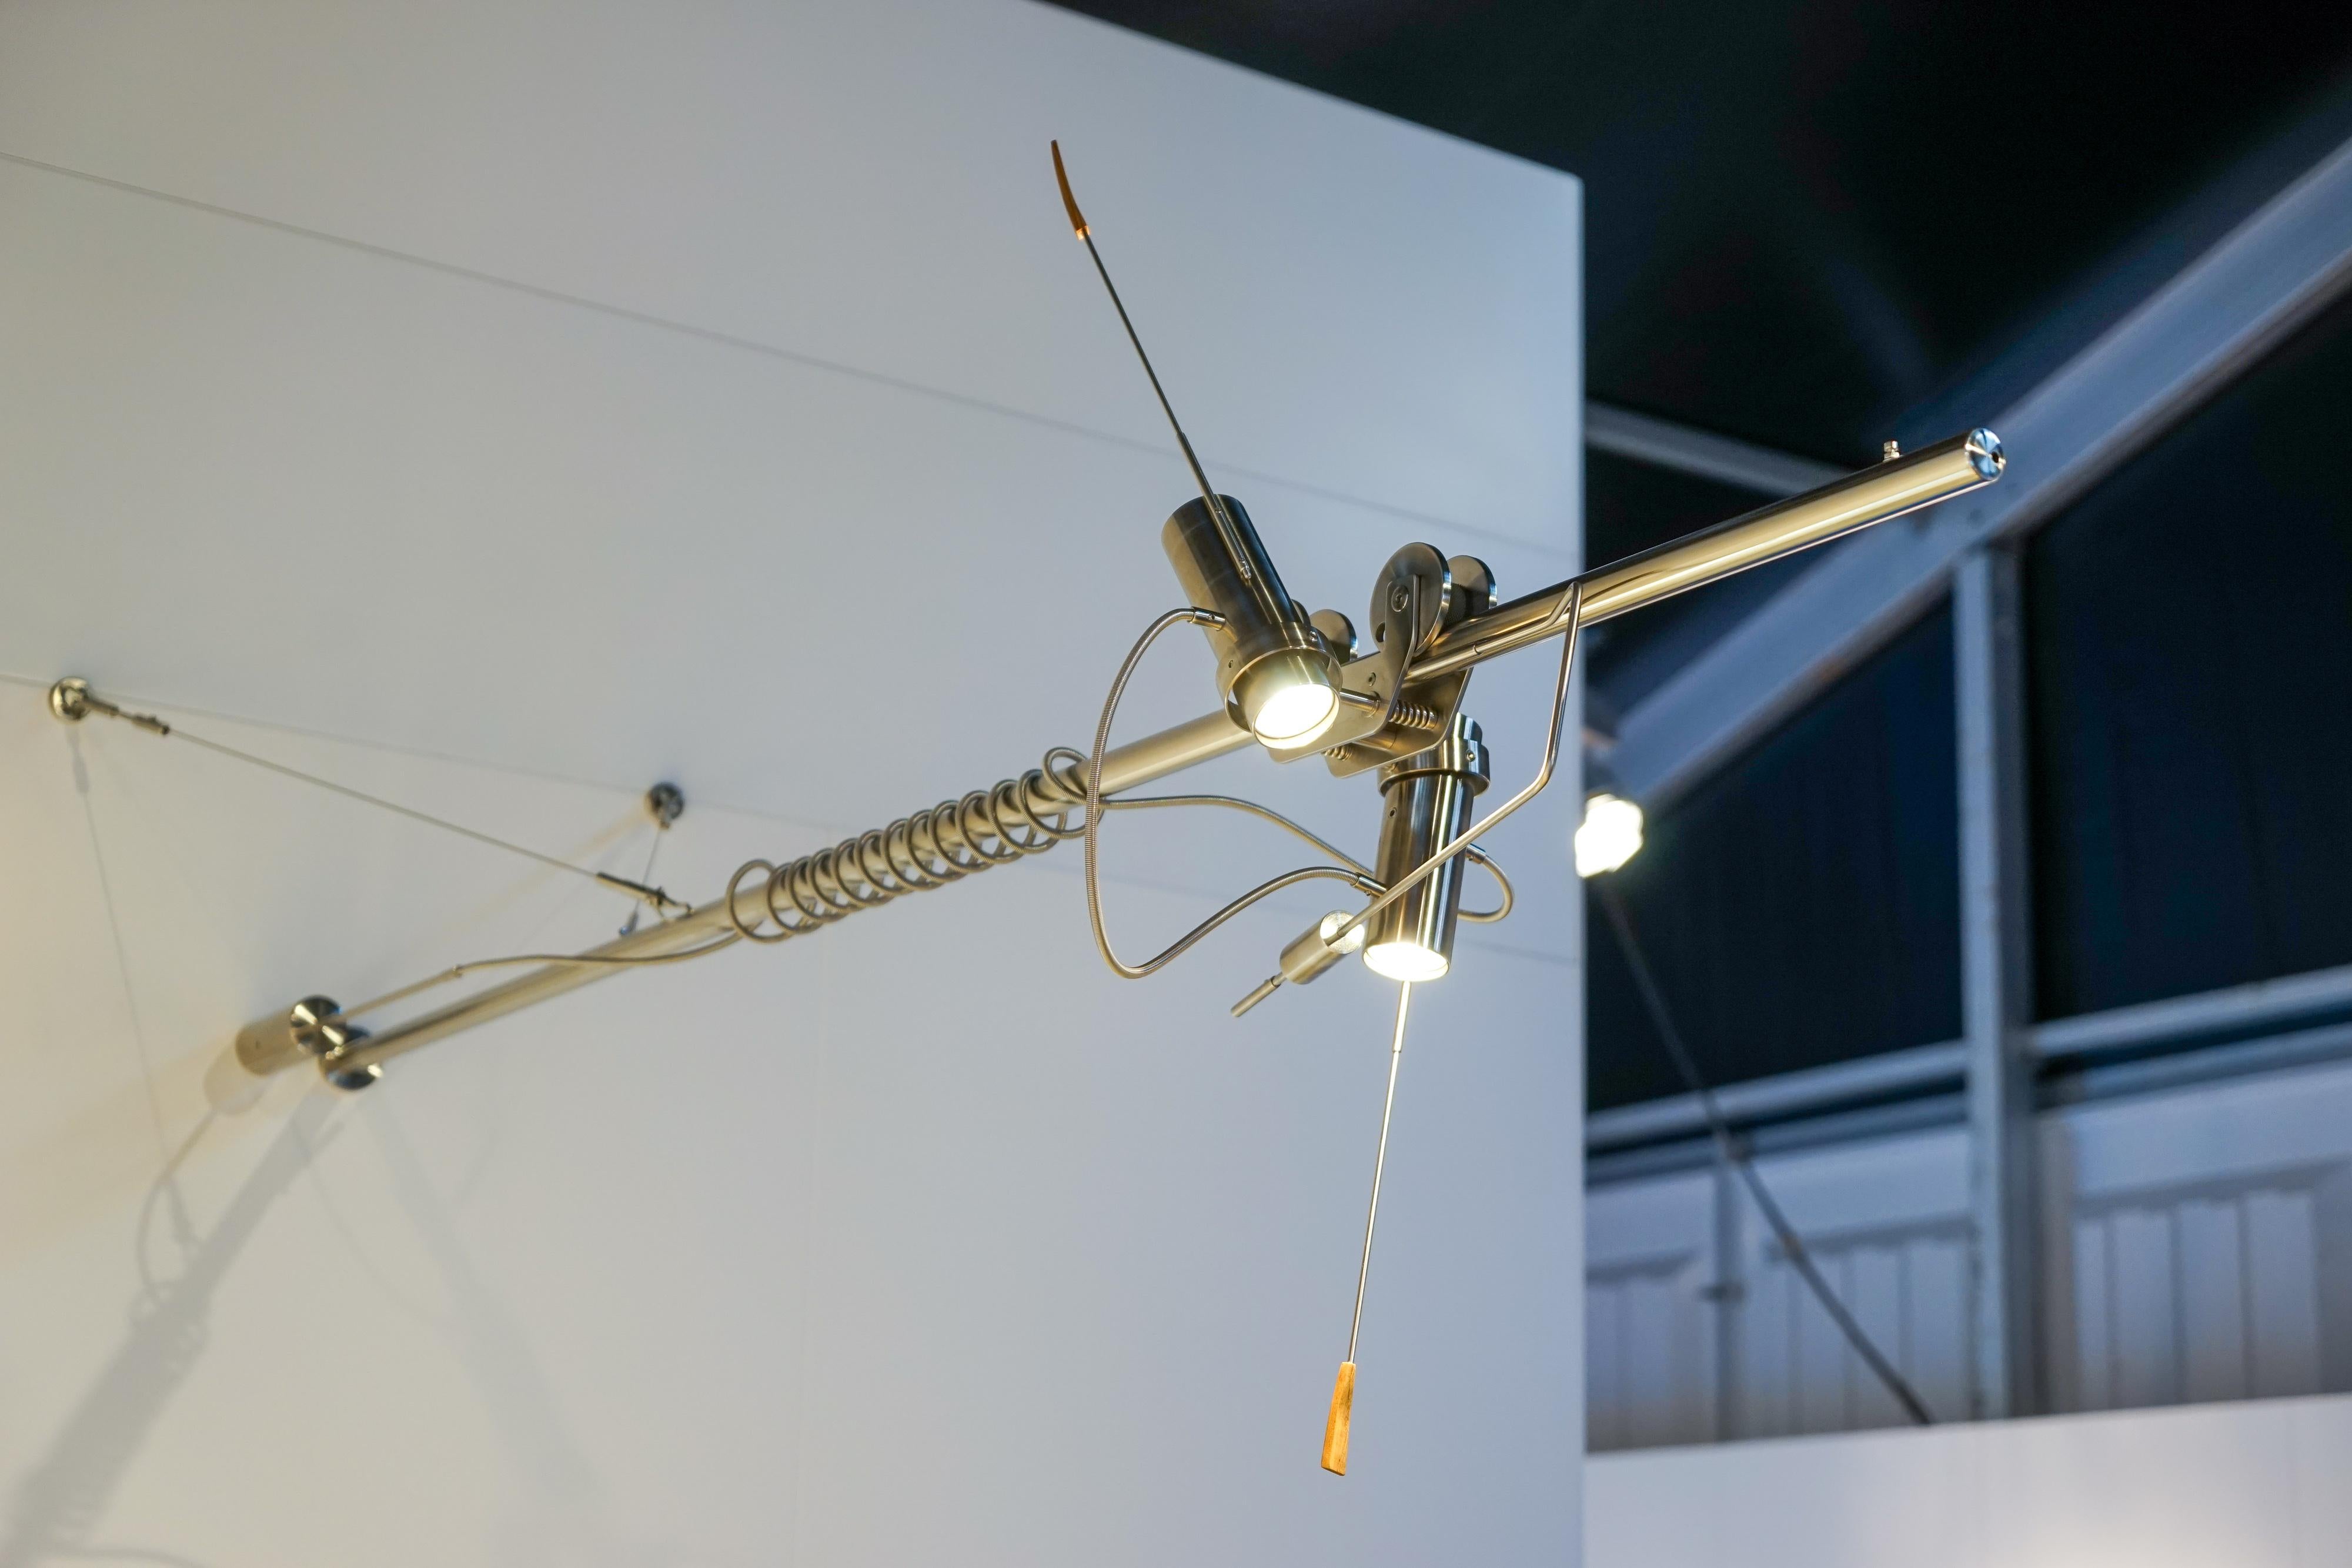 This sculptural piece from Polish studio, Szostak Atelier, features a 2-meter-long arm crafted from premium stainless steel, showcasing elements of Industrial design. The spotlights, positioned on a mobile bogie, offer versatile illumination with